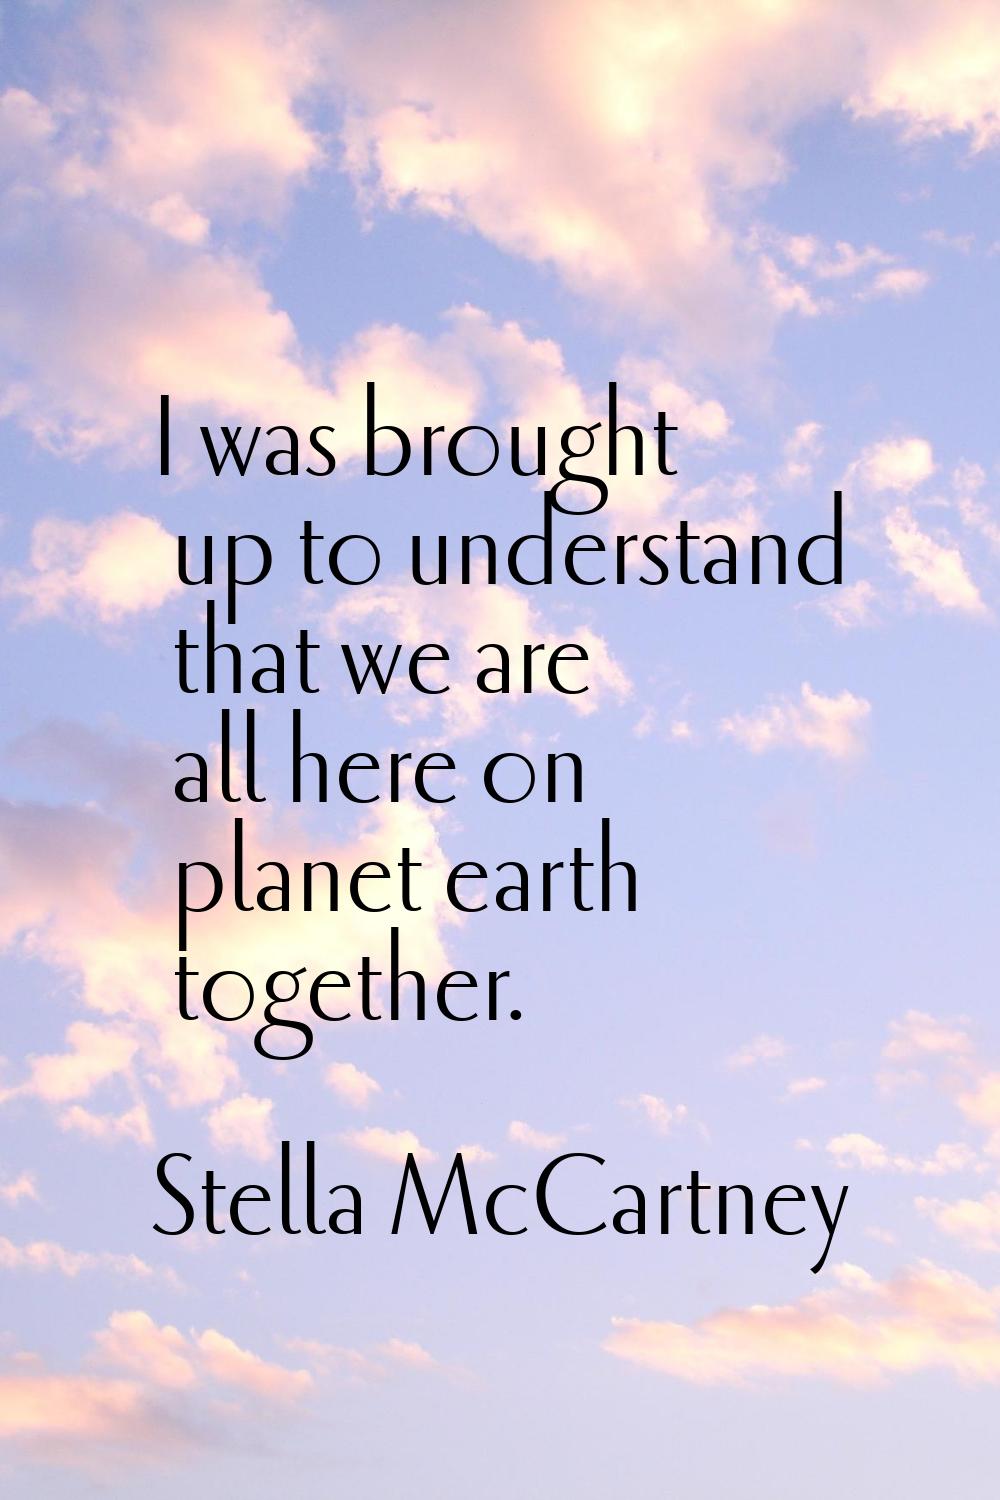 I was brought up to understand that we are all here on planet earth together.